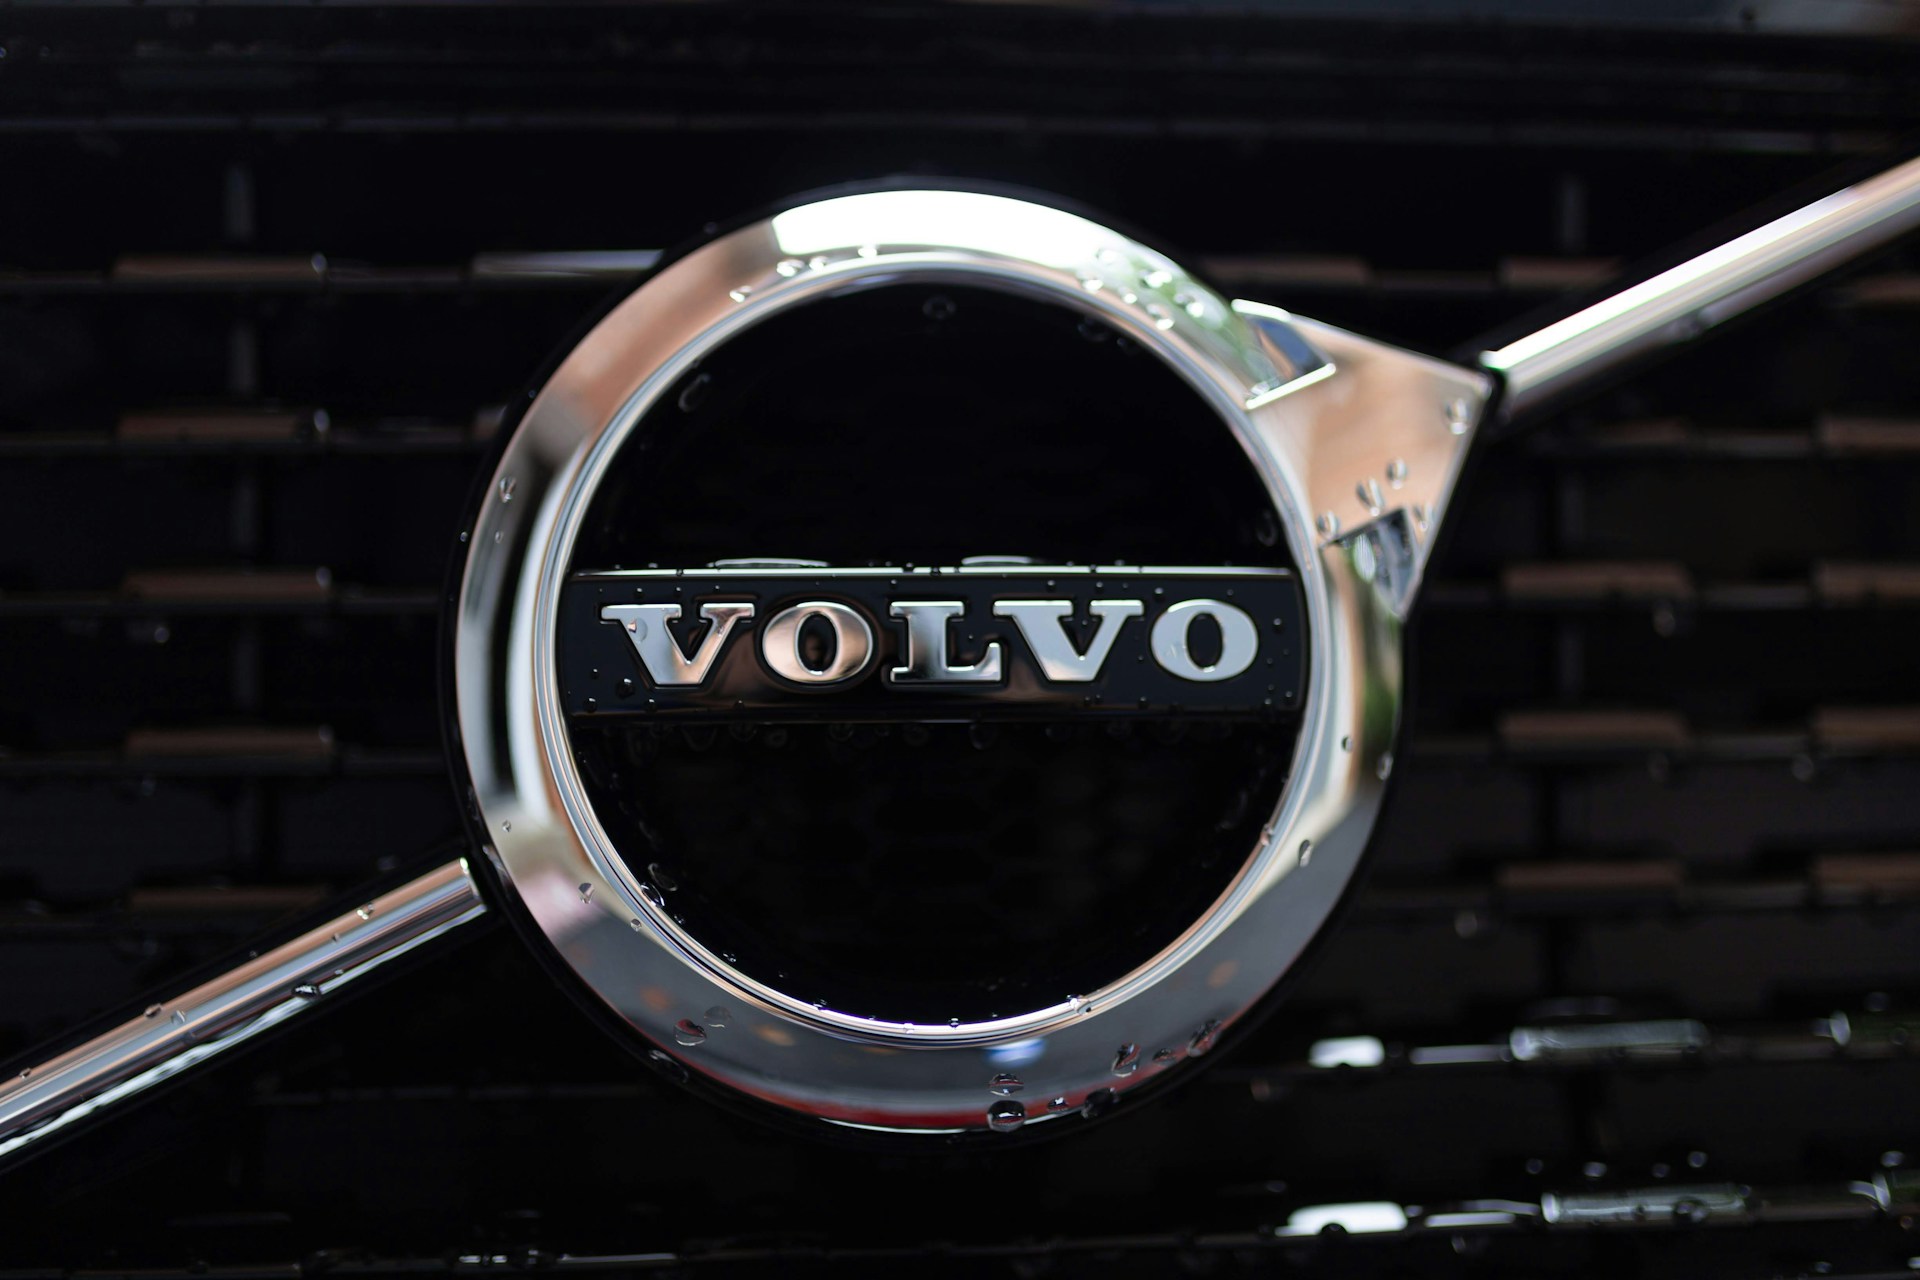 lose-up photo of a silver Volvo logo on the chrome grille of a black car.